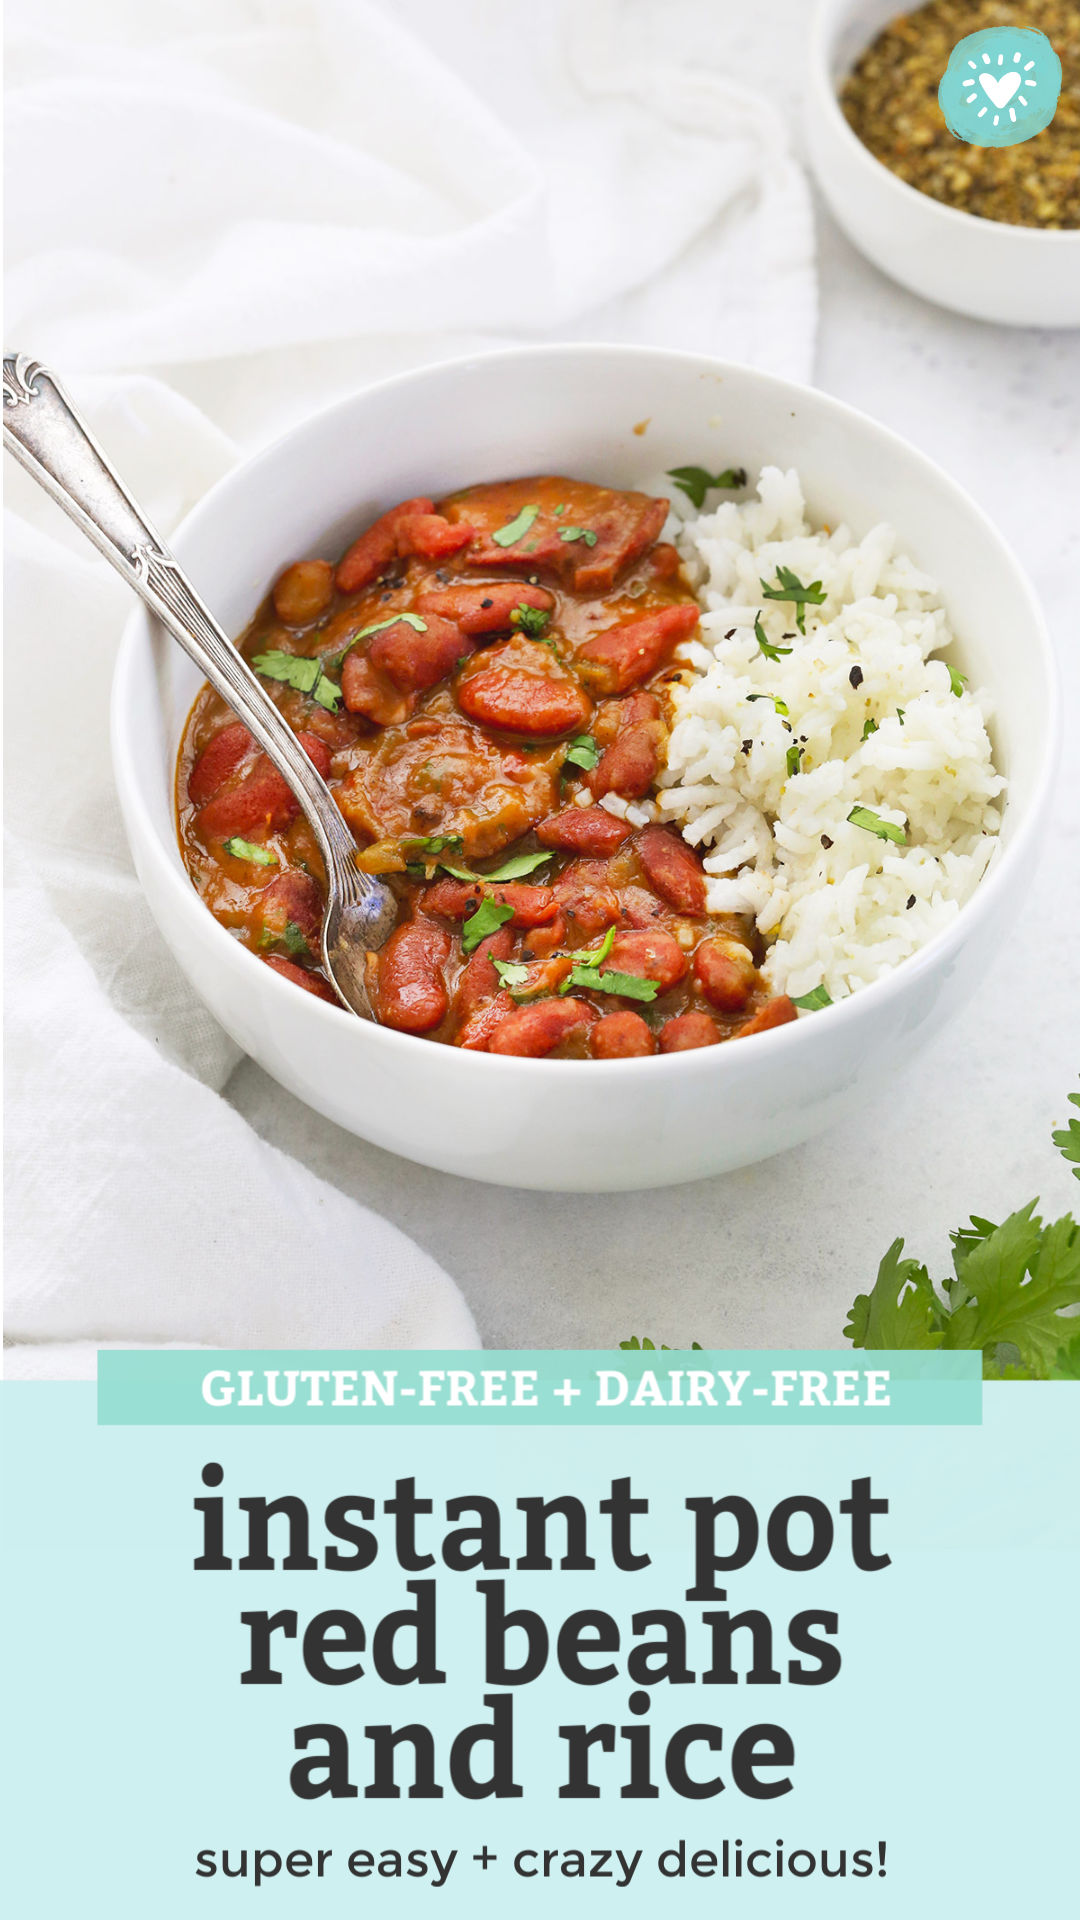 front view of Instant Pot Red Beans and Rice in a bowl garnished with fresh herbs with text that reads "gluten-free + dairy-free Instant Pot red beans and rice. Super easy + crazy delicious!"